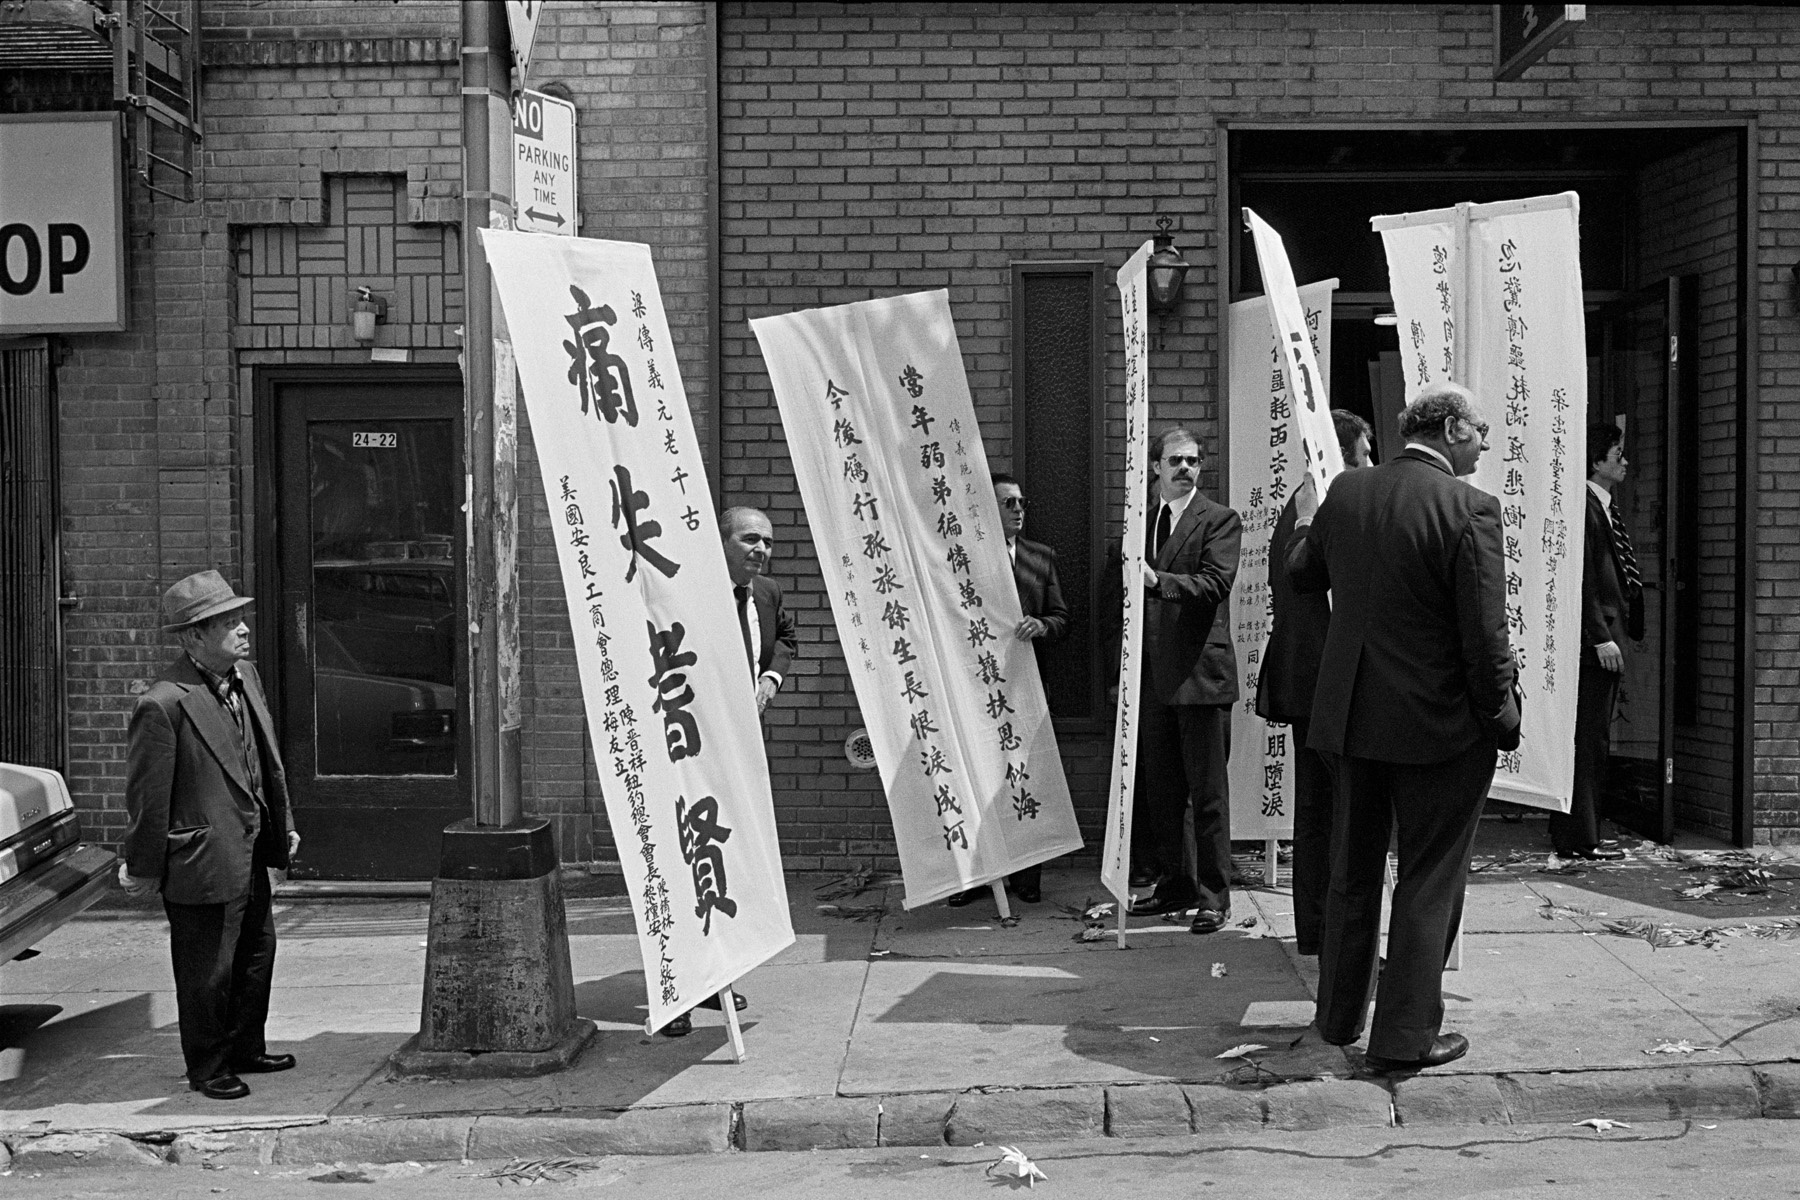 Funeral, Mulberry St., New York Chinatown, 1982.The part of Mulberry Street next to Columbus Park used to be home to funeral homes run by Italian Americans when Little Italy stretched south of Canal Street. After Chinese moved into the area and took over the funeral businesses, some of the Italian workers stayed on. This photograph shows a funeral with Chinese banners being held up by non-Chinese funeral home workers.